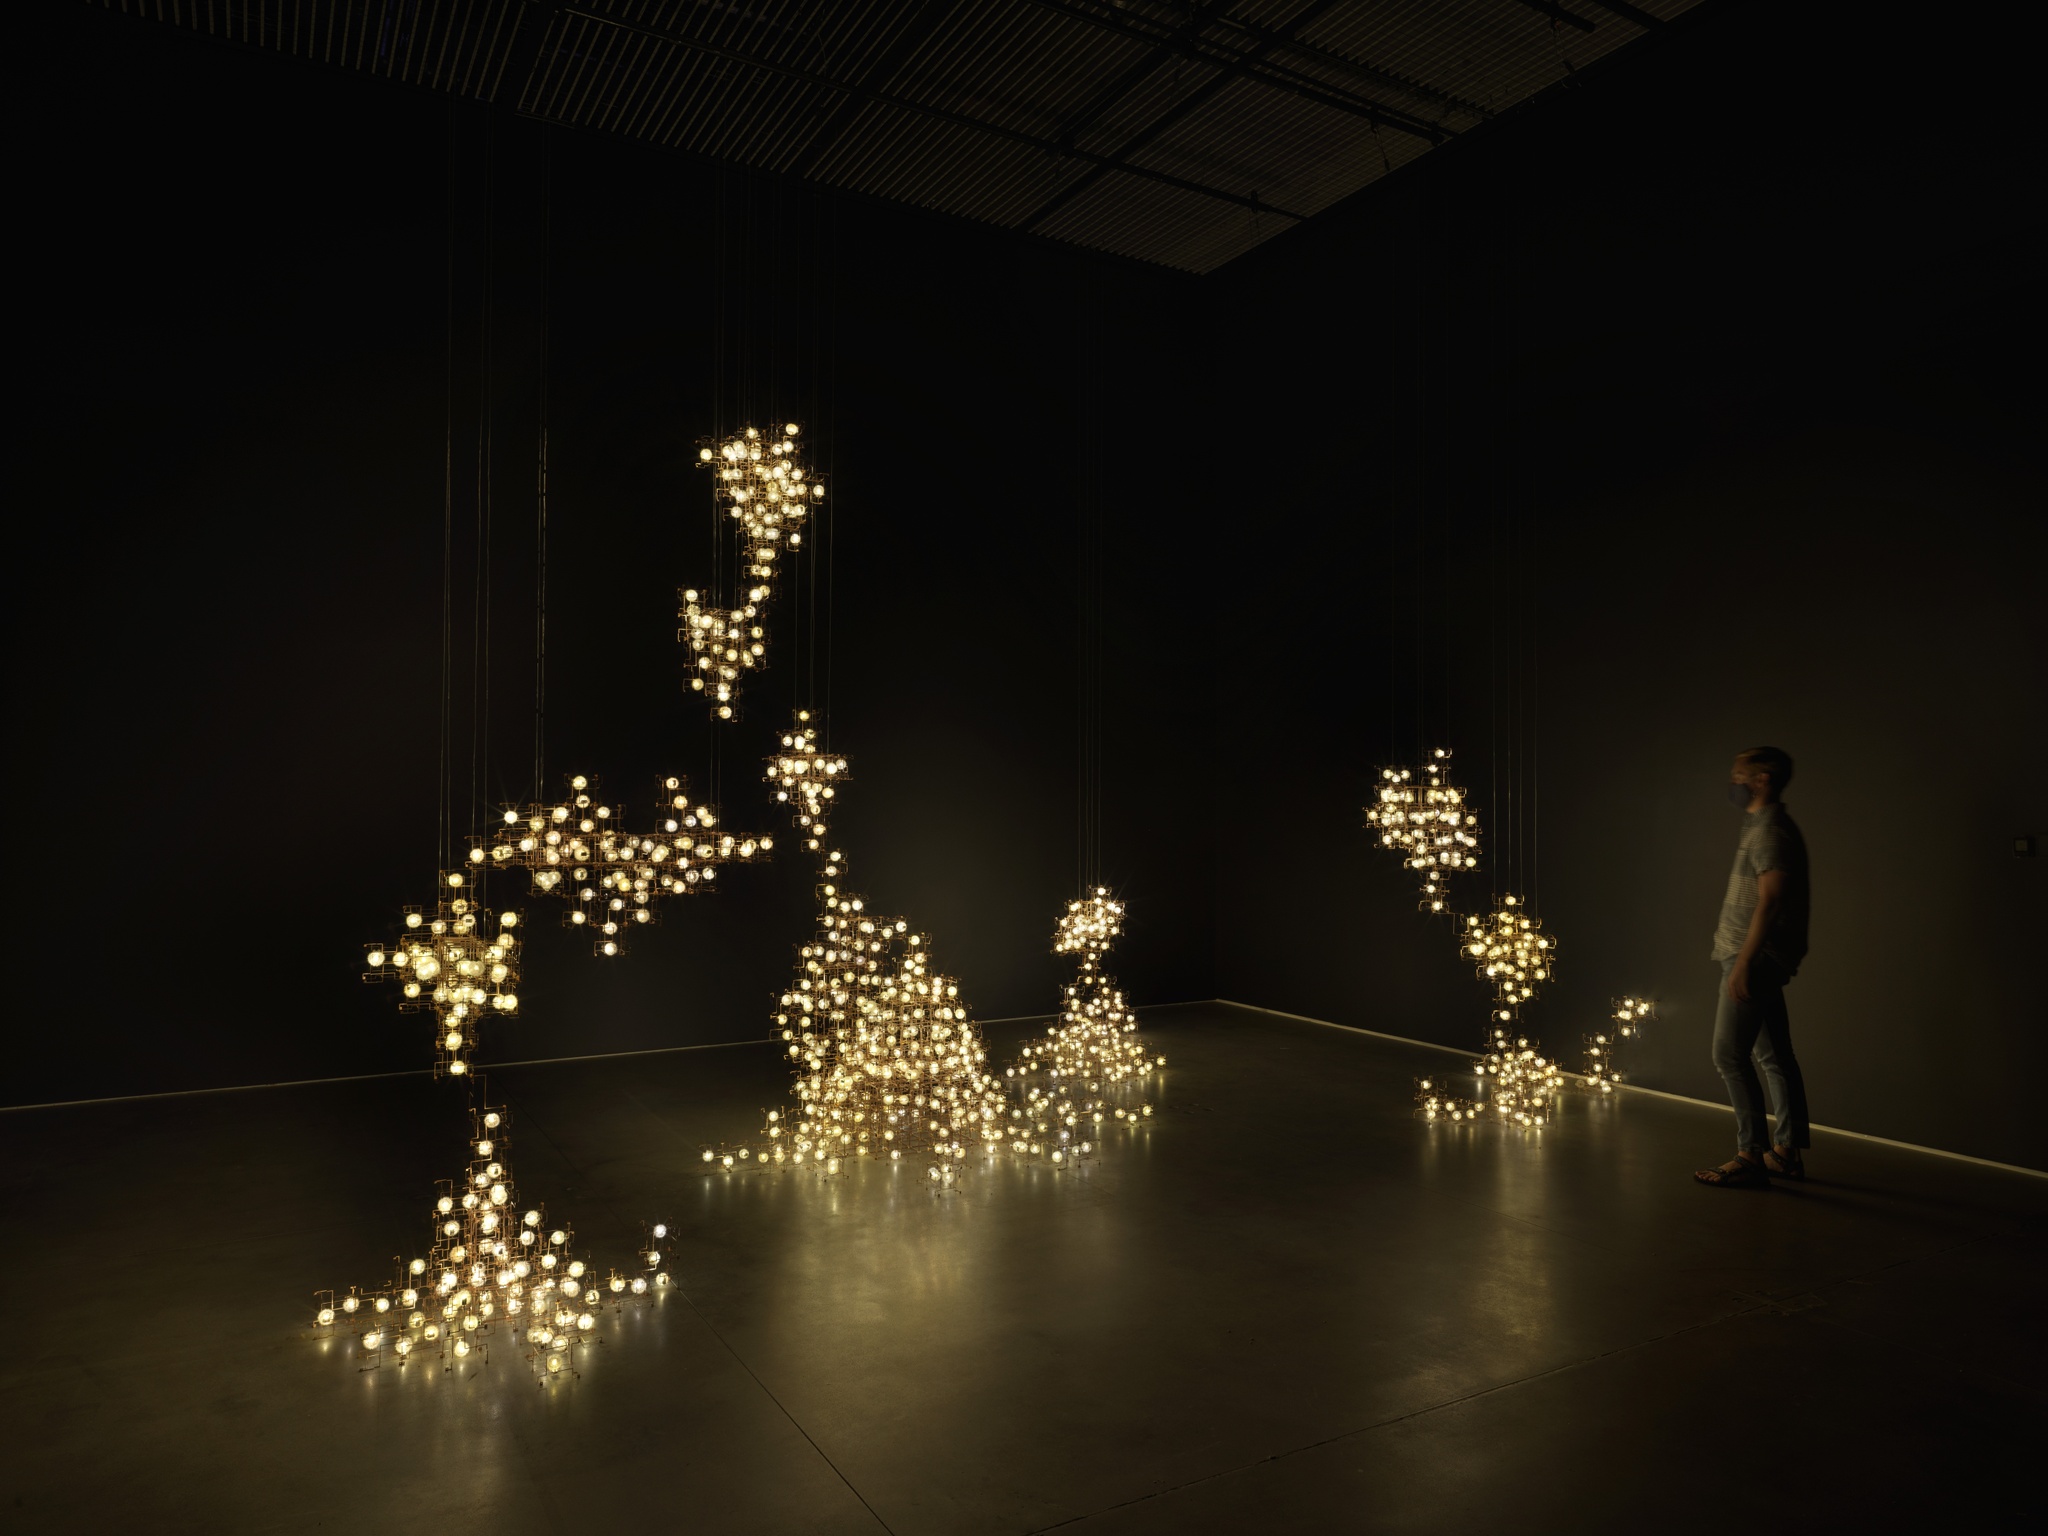 A person standing in a gallery space beside an installation of small twinkling lights arranged in a metal structure that seems to grow out of the floors and walls